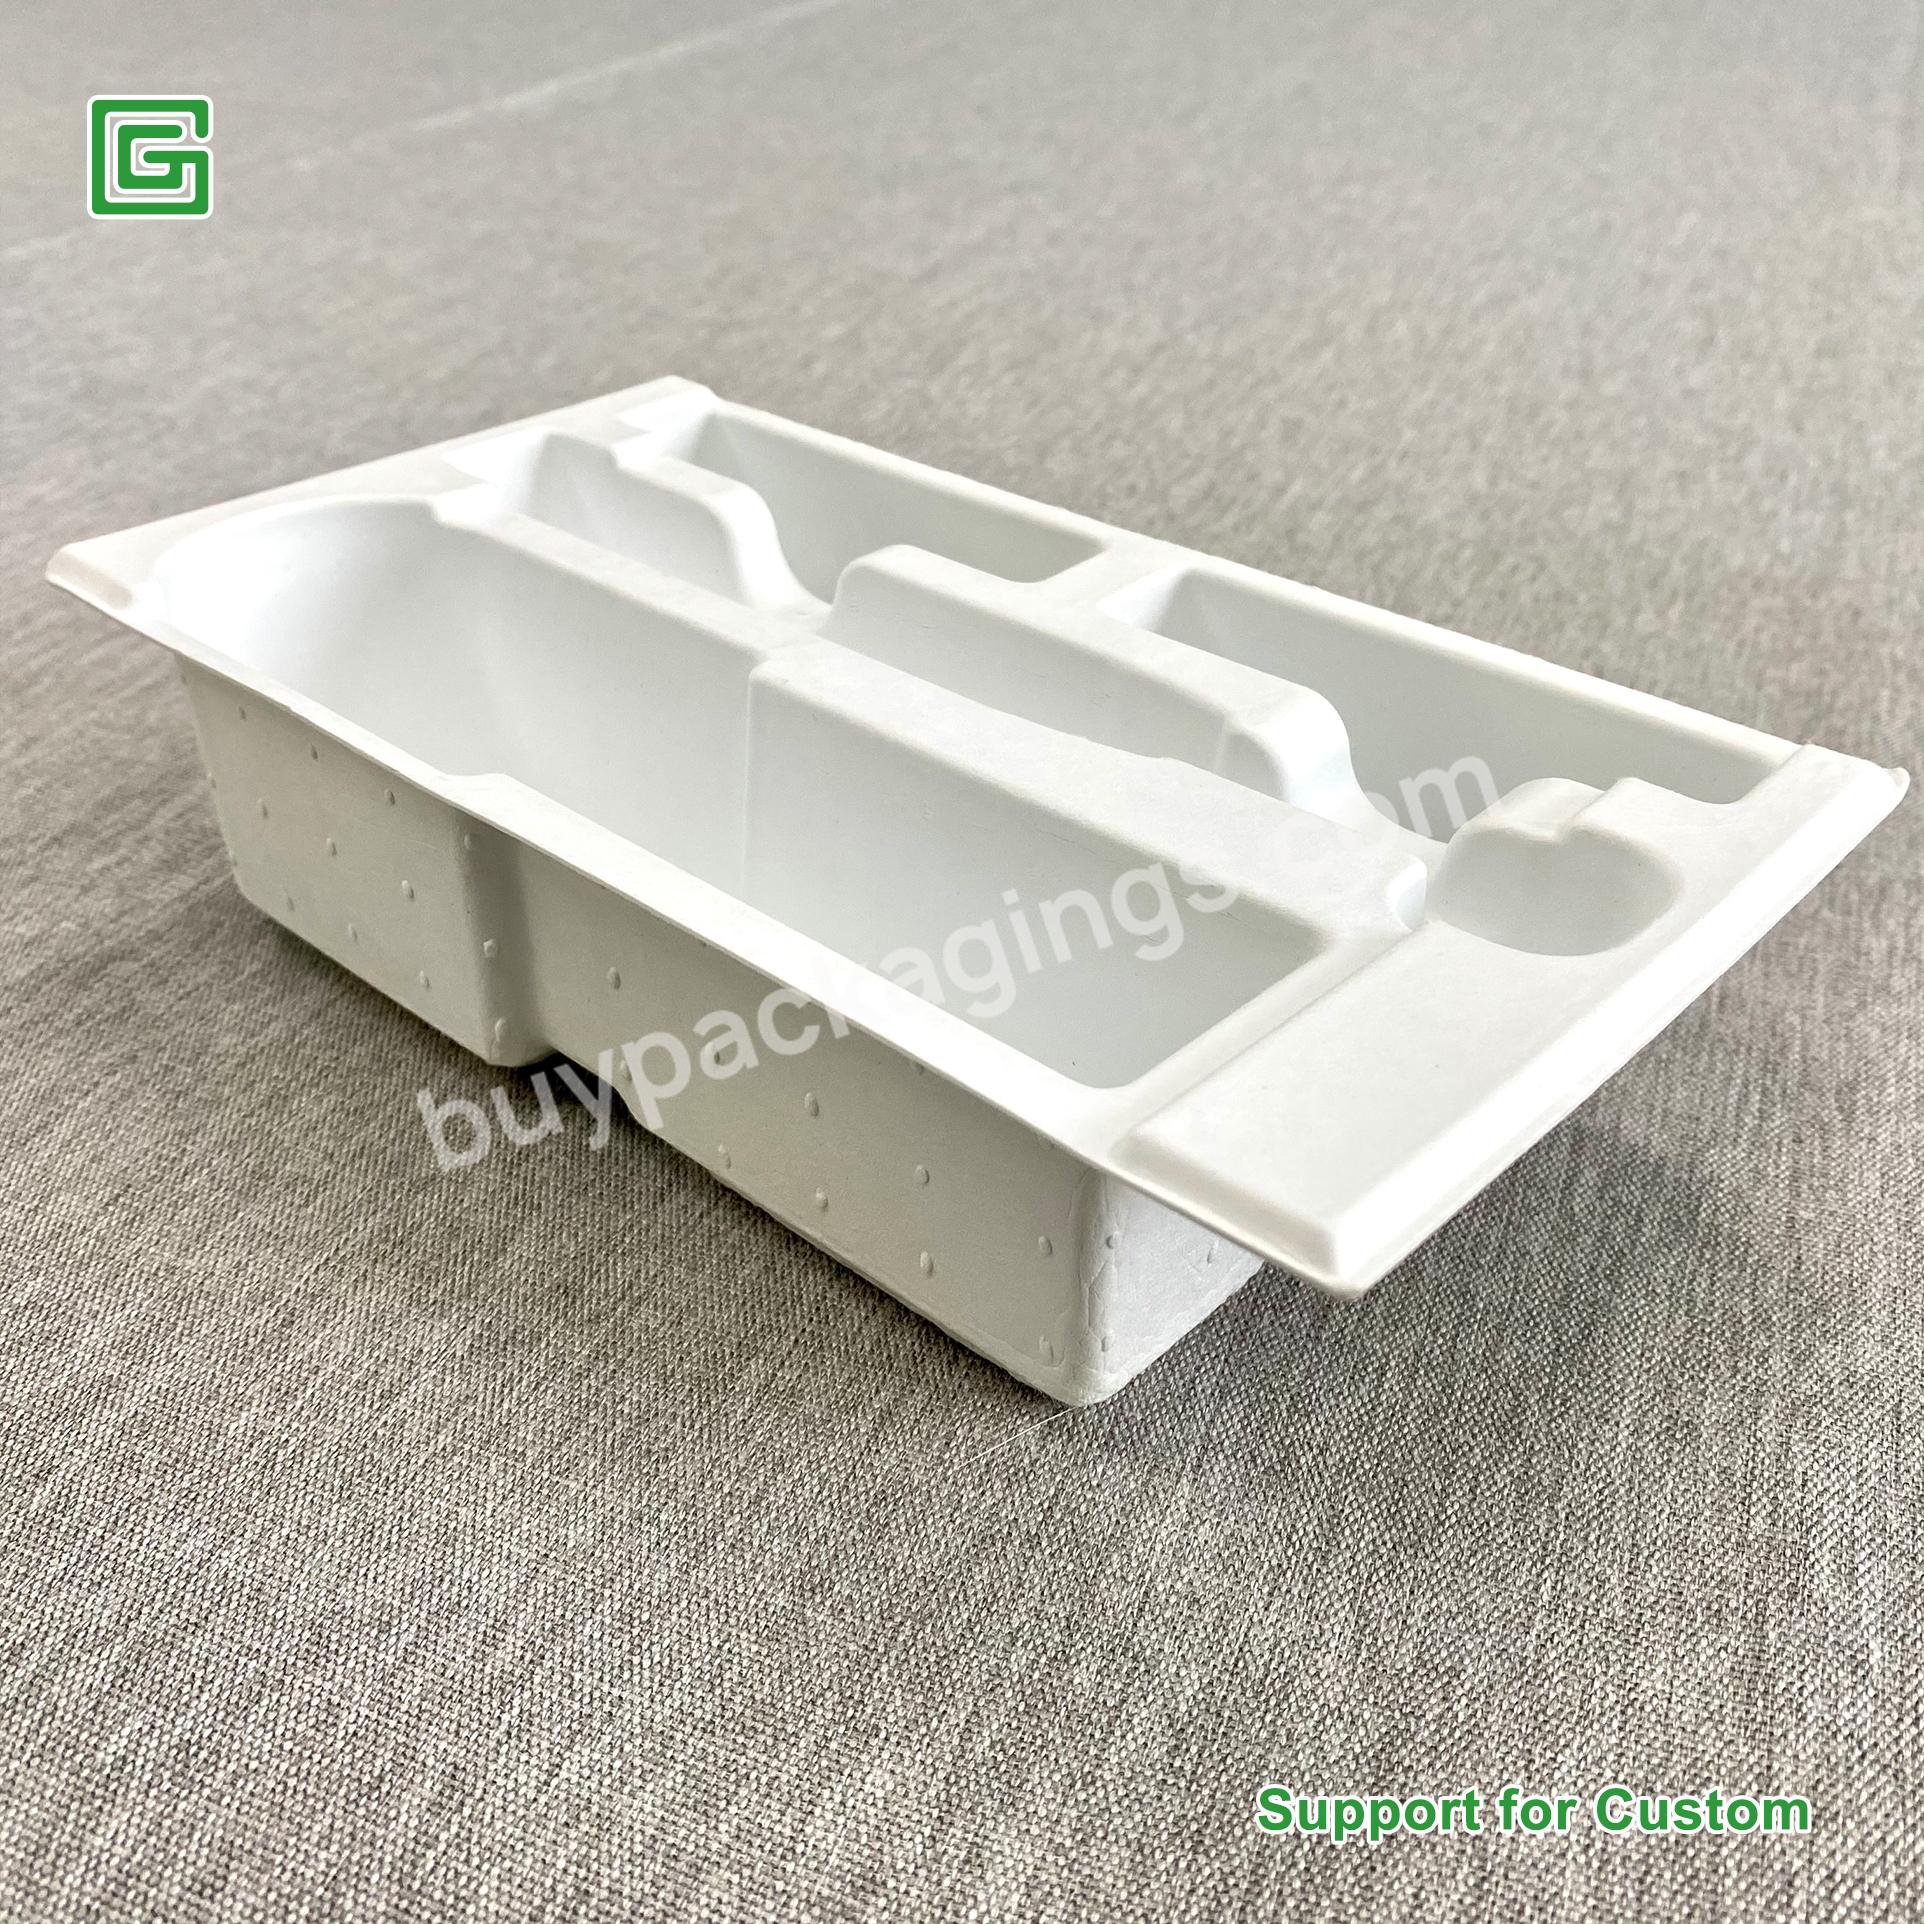 Biodegradable Custom Embossing Pulp Moulded Process Type Paper Trays For Electronic Inner Components Parts - Buy Electronic Toothbrushes Pulp Tray,Customized Molded Pulp Tray For Electric Toothbrush,Molded Pulp Toothbrushes Tray.